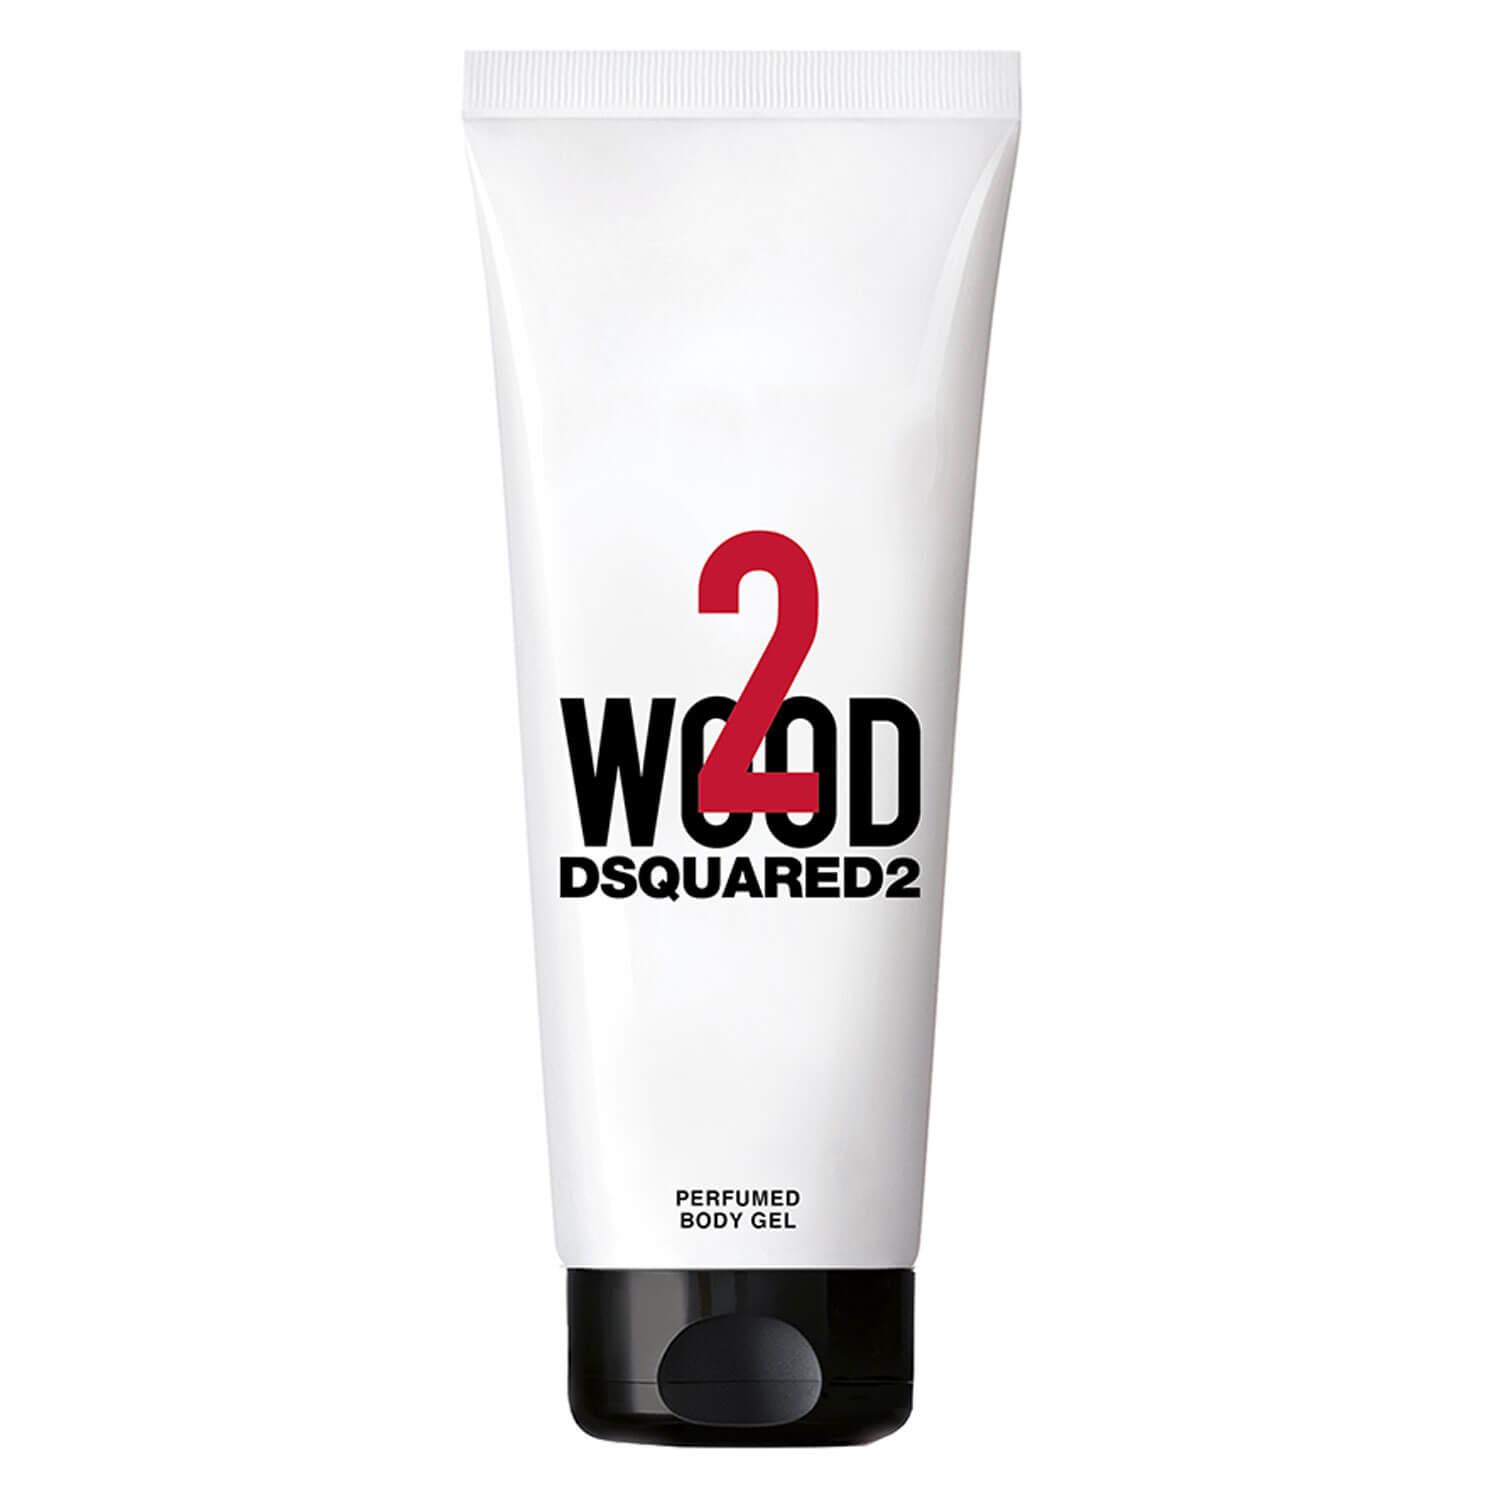 DSQUARED2 TWO WOOD - Perfumed Body Gel